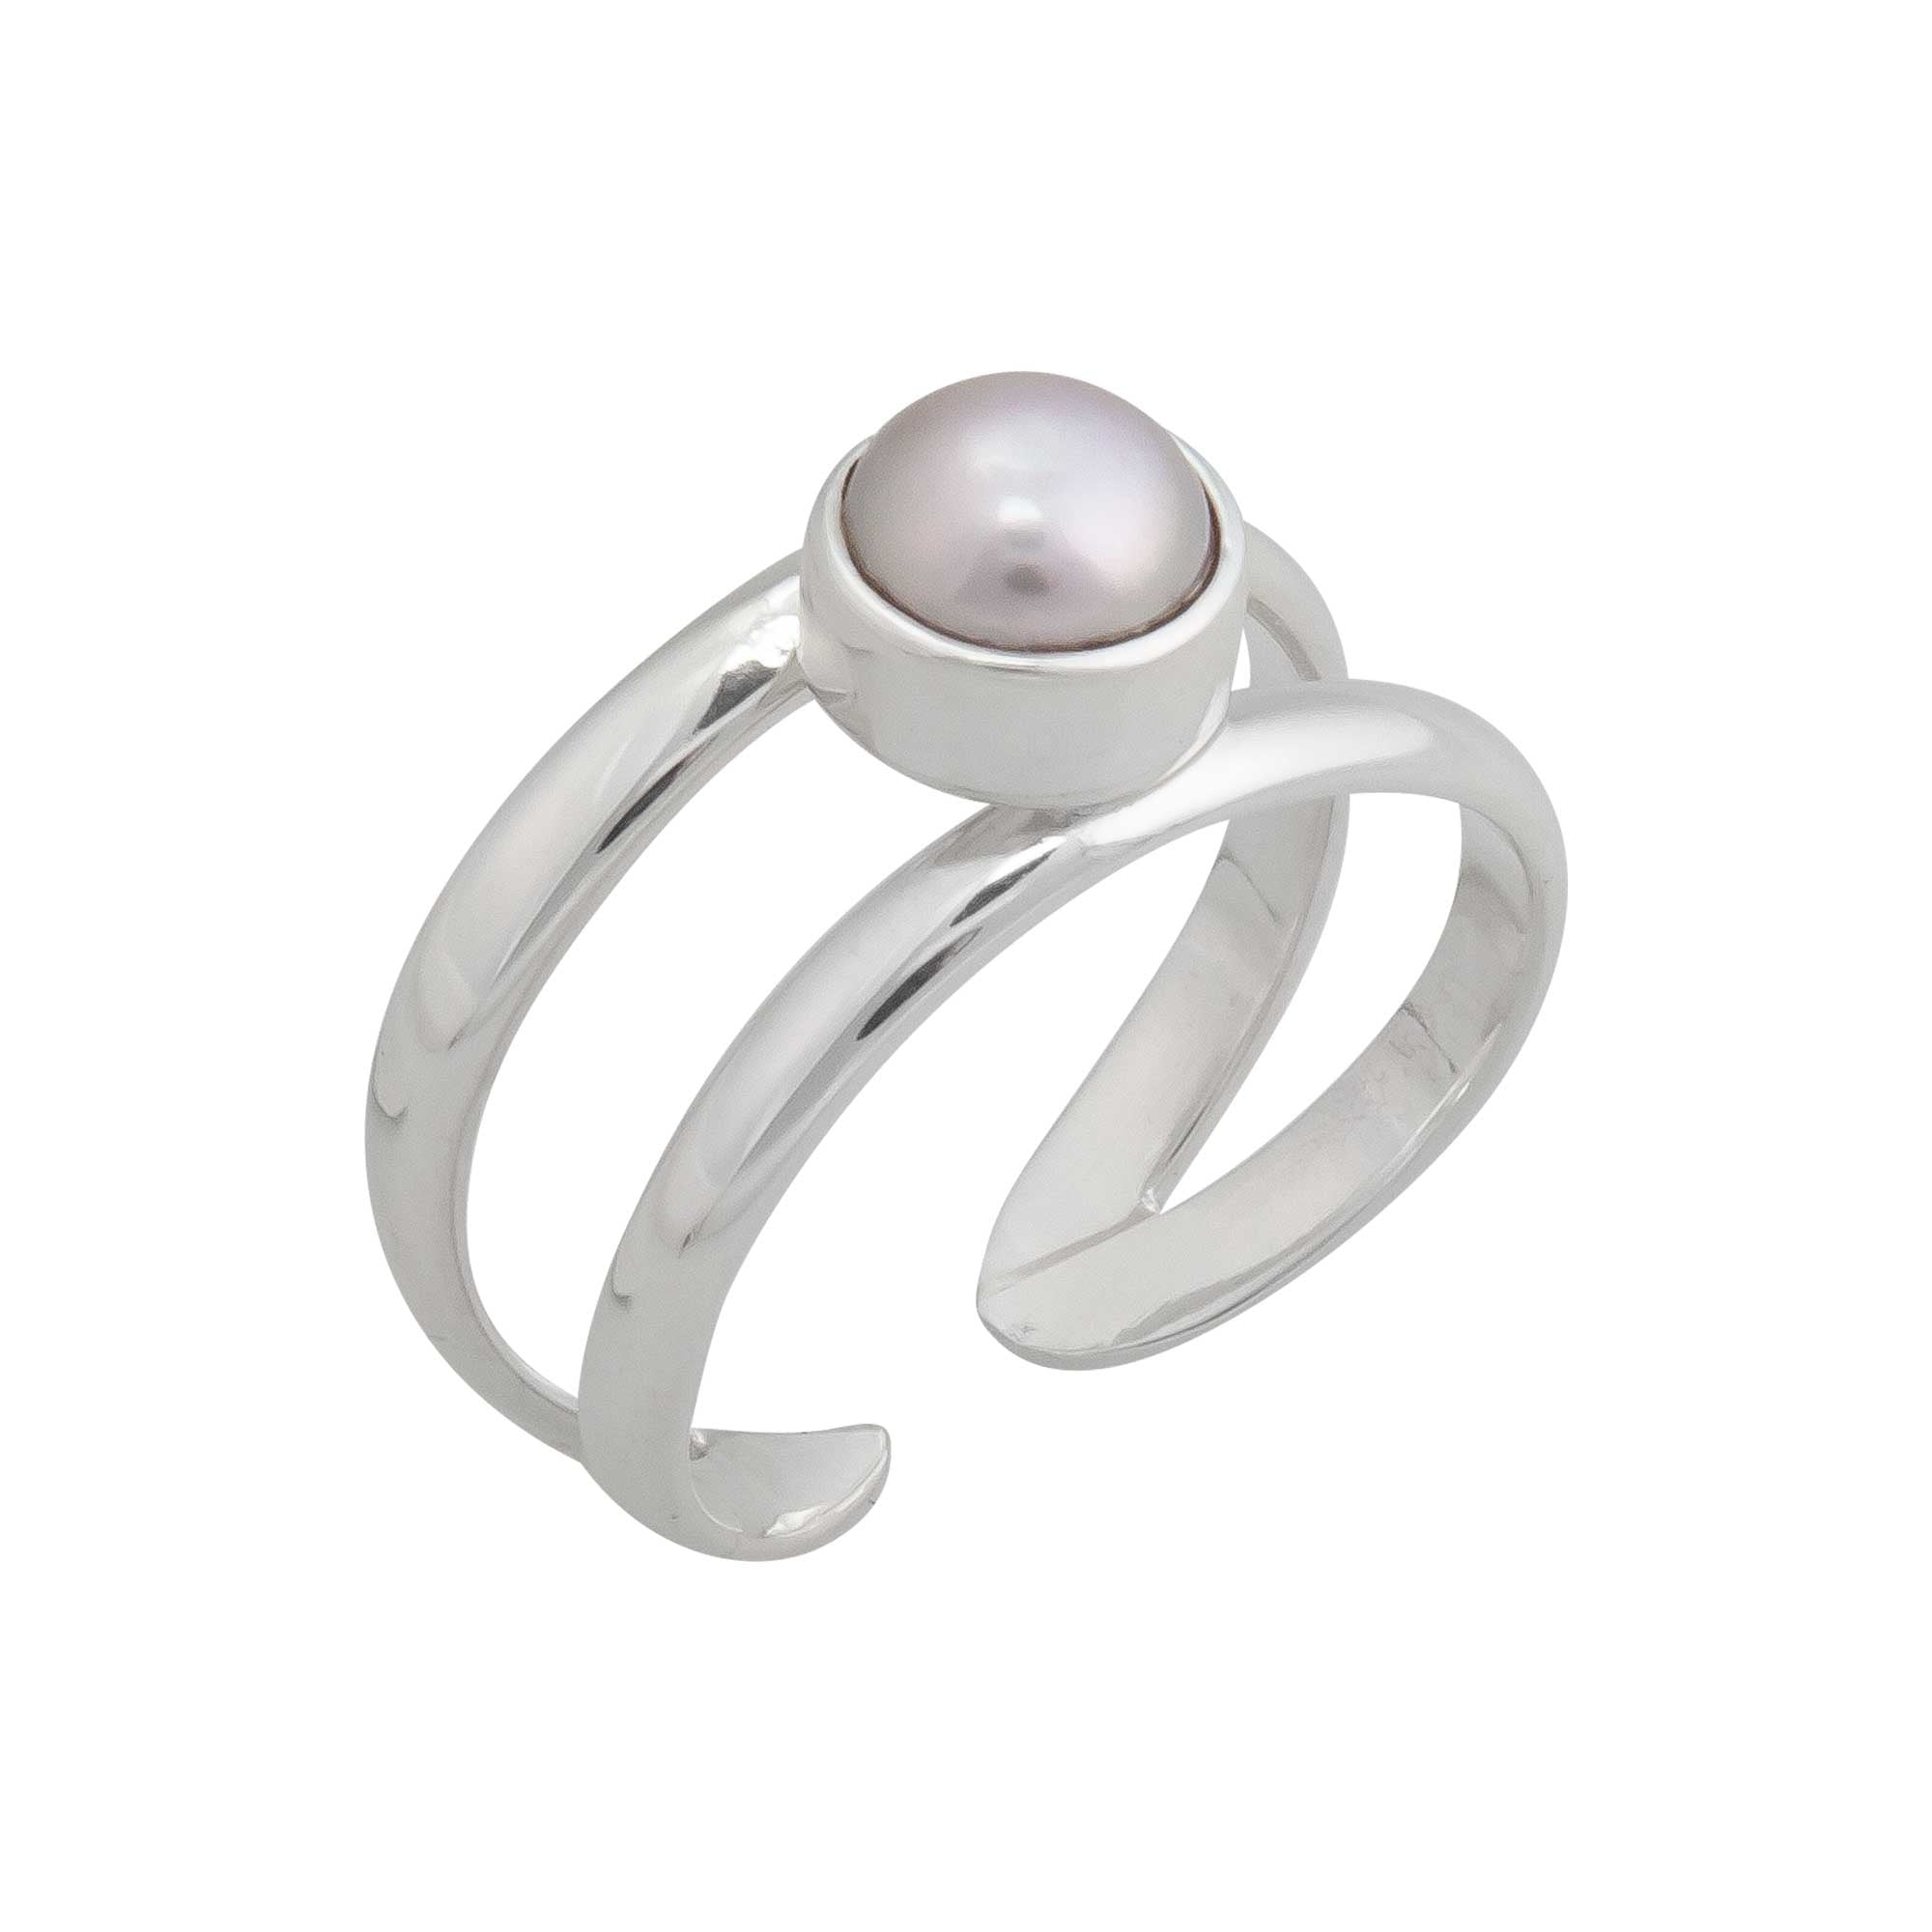 Silver Pearl Ring / 92.5% Sterling Silver Ring / Handmade Ring / Fresh  Water Pearl Ring / Promise Ring /